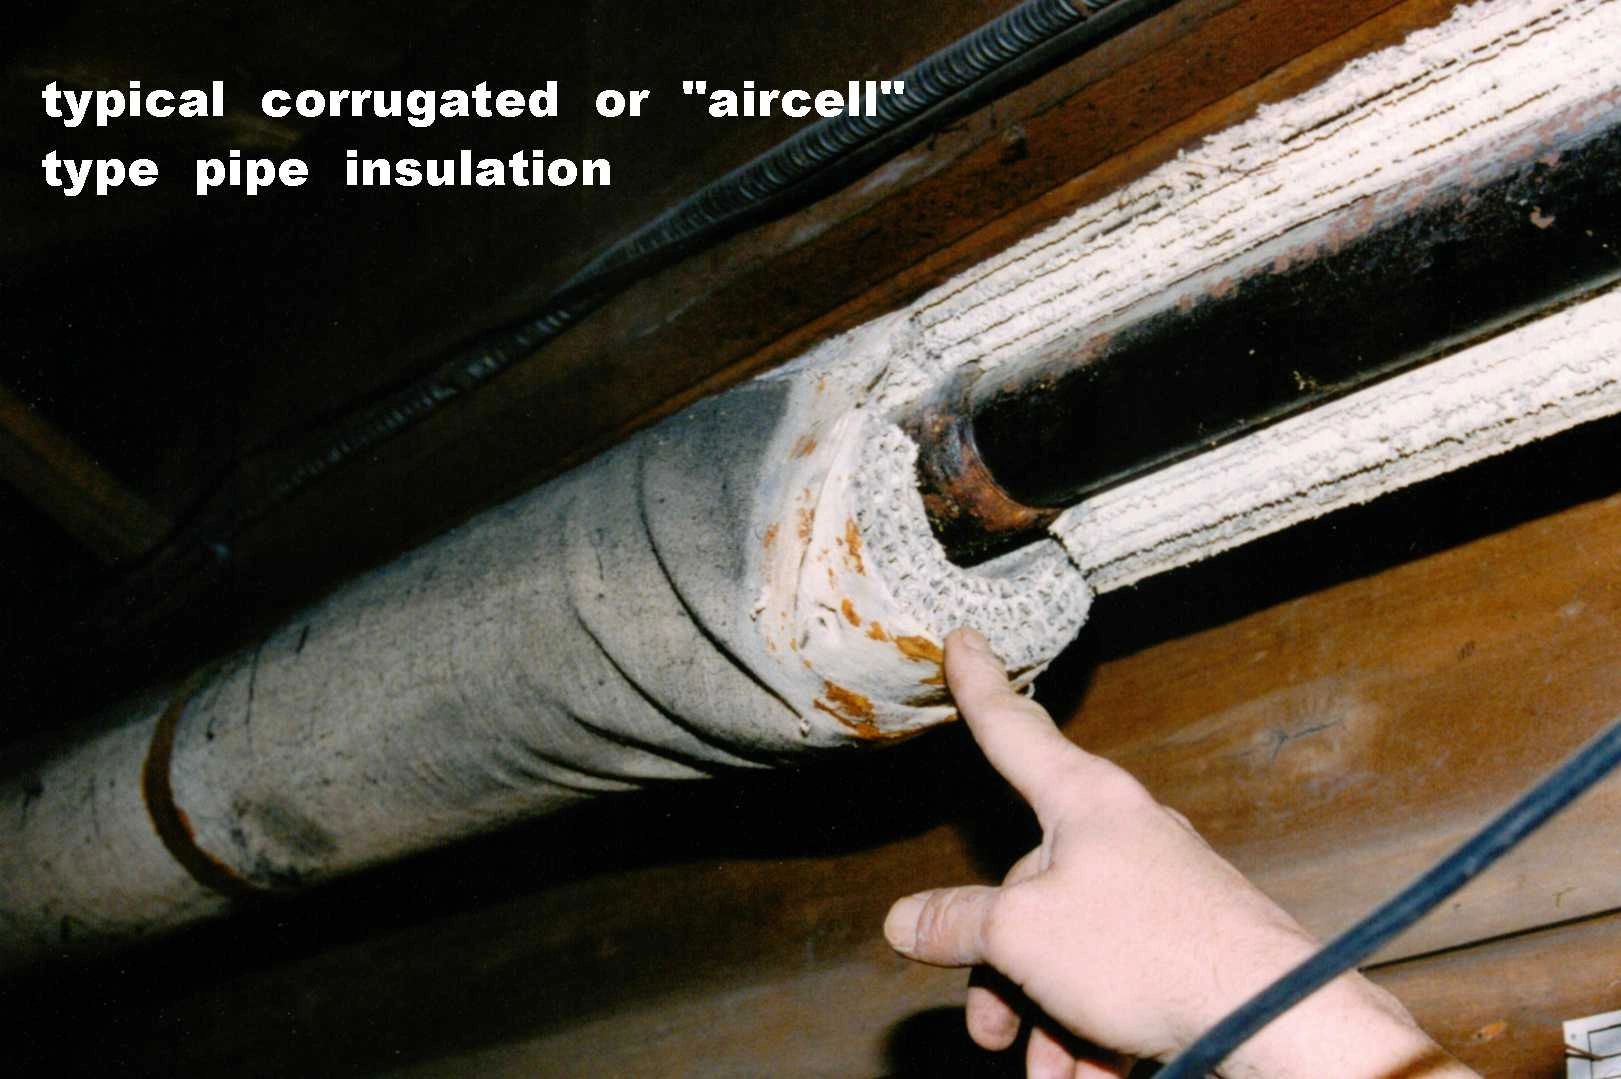 Typical corrugated, or air-cell asbestos pipe insulation